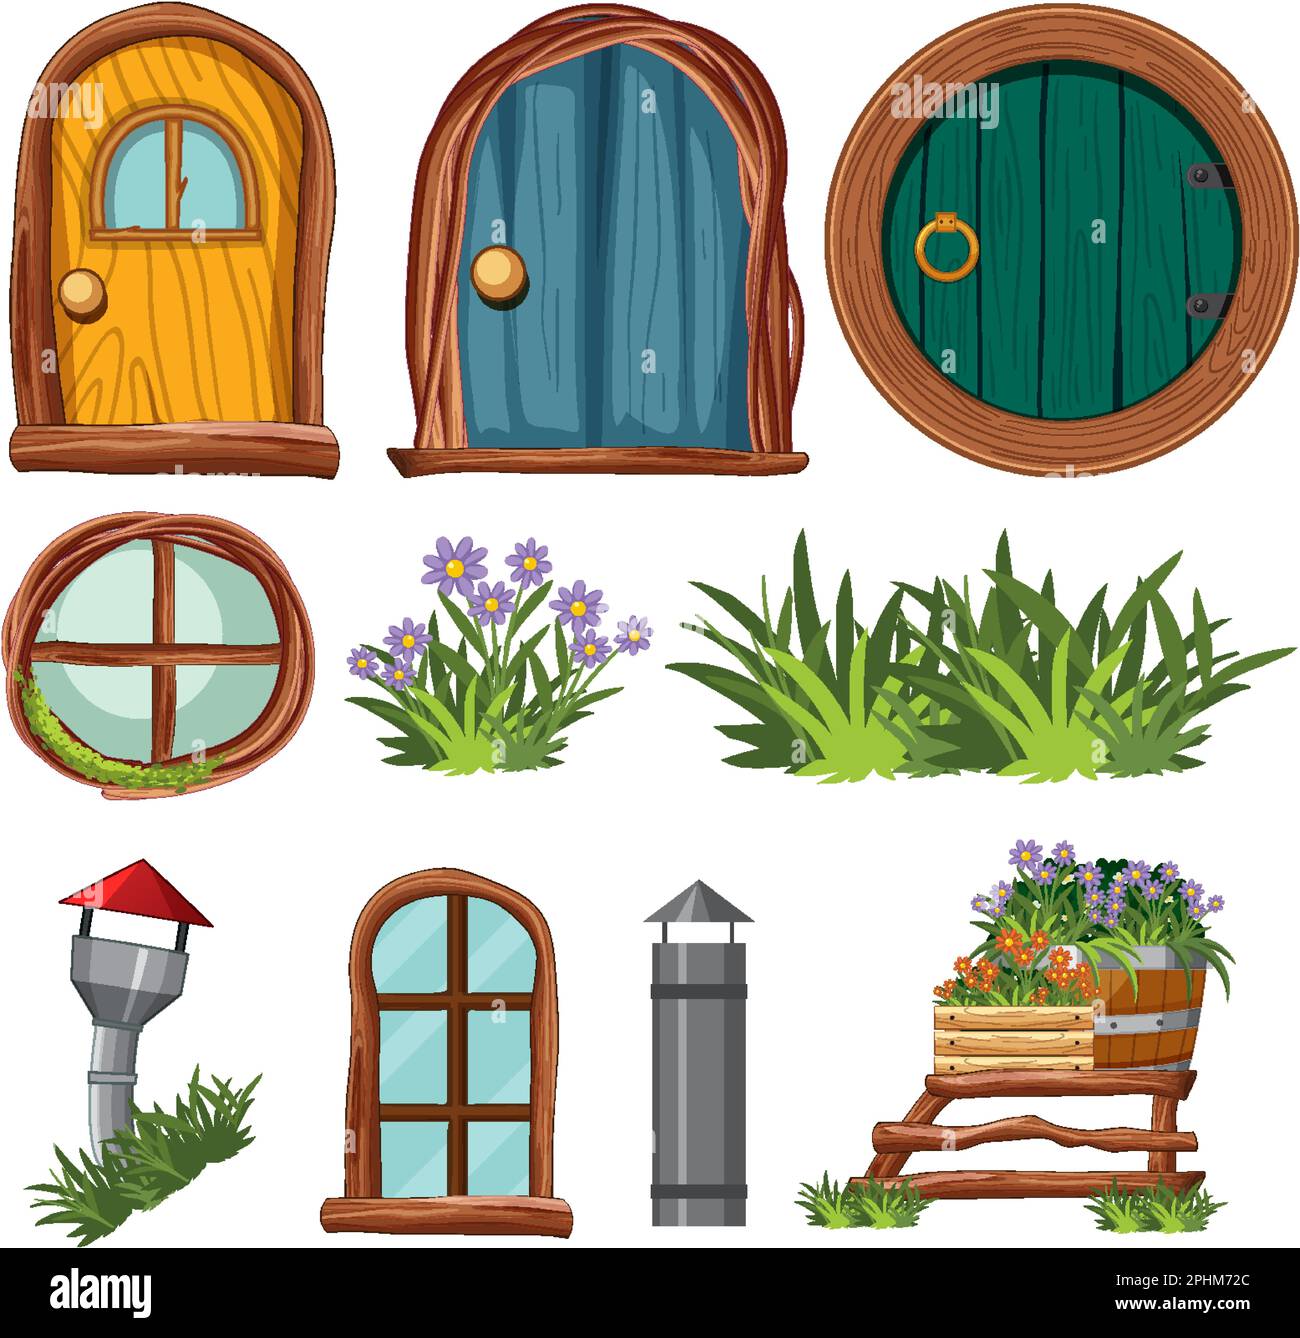 Set of fairy tales house elements illustration Stock Vector